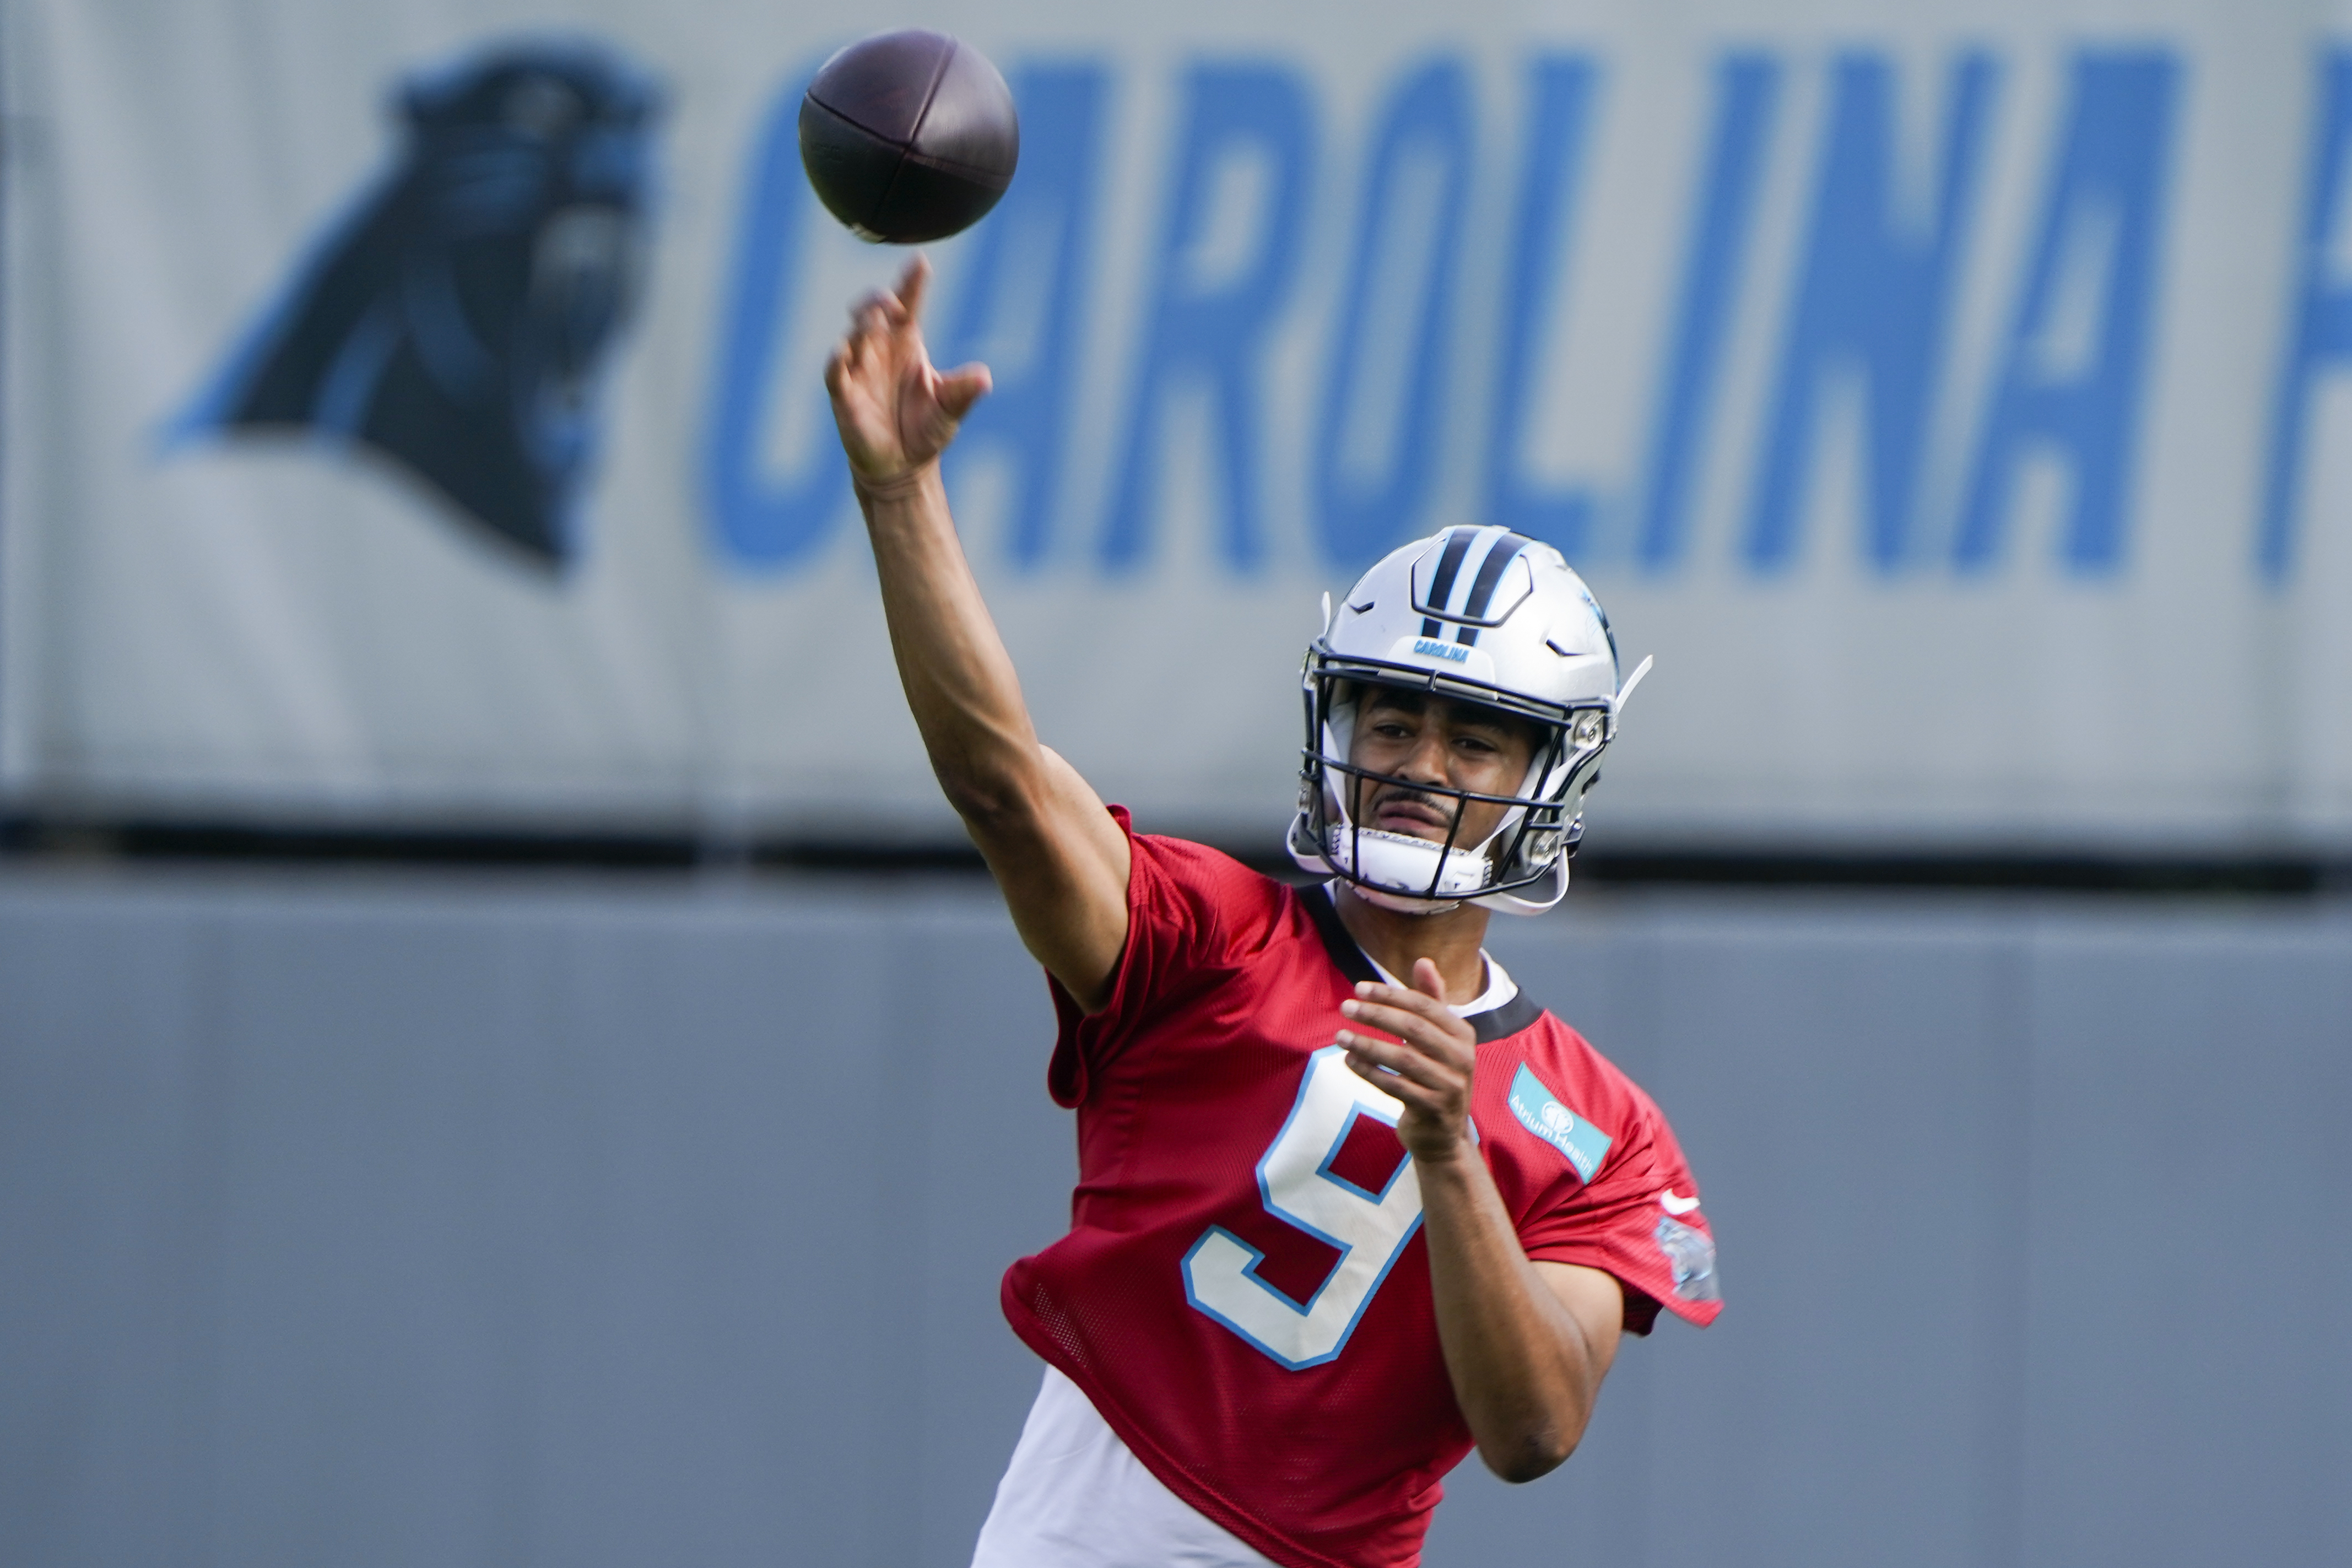 Bijan Robinson outshines top pick Bryce Young as Falcons knock off Panthers  24-10